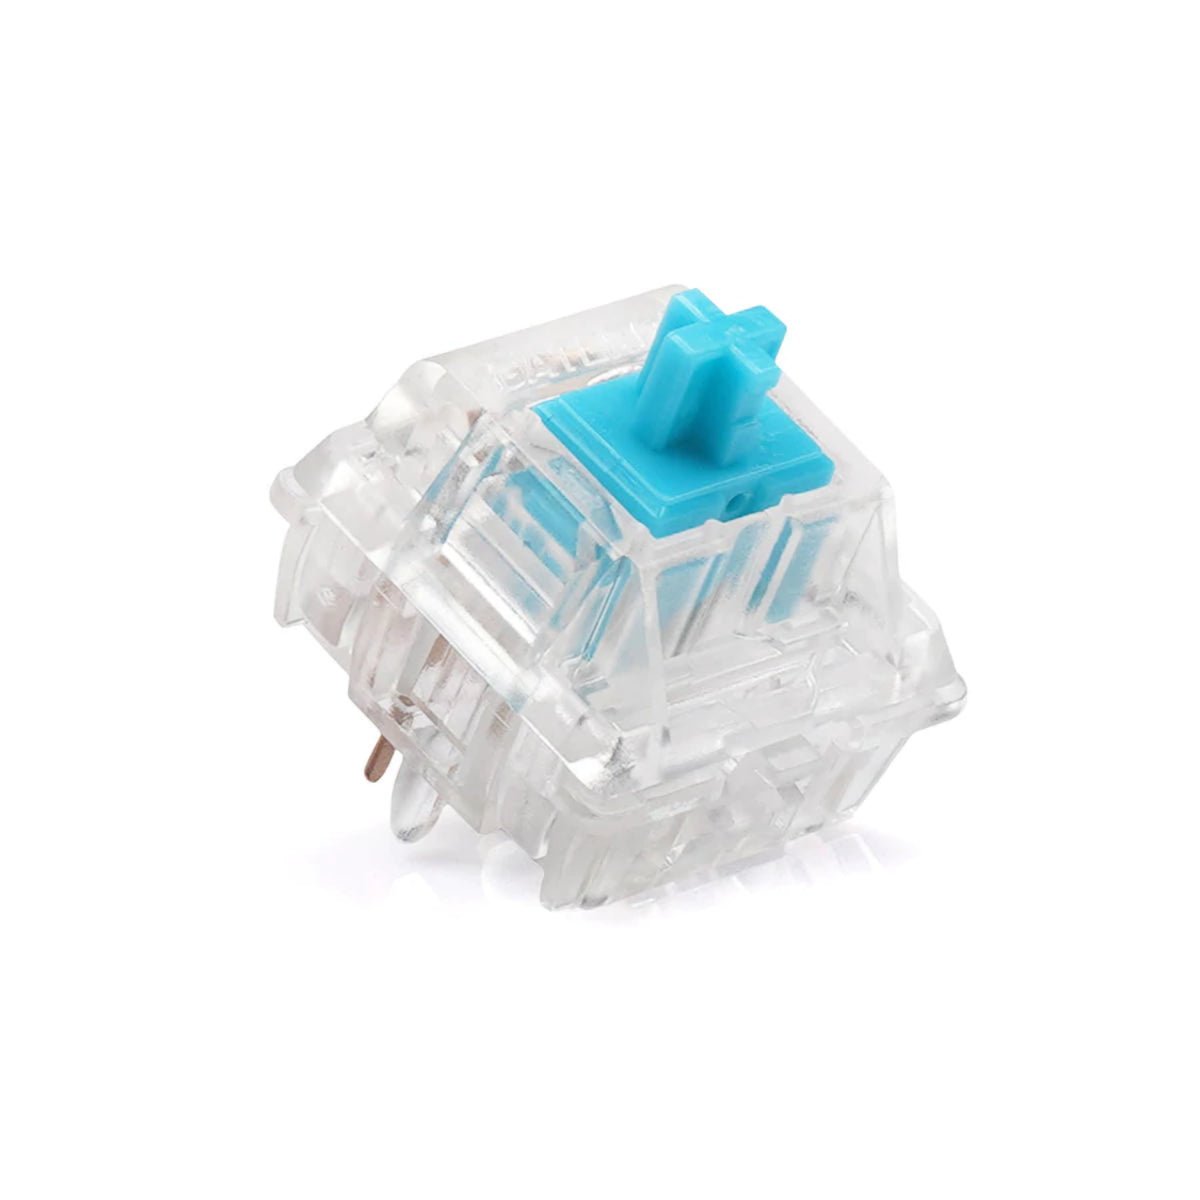 KBD Fans Zeal V2 Tactile Switches 65g - Zilents - Store 974 | ستور ٩٧٤